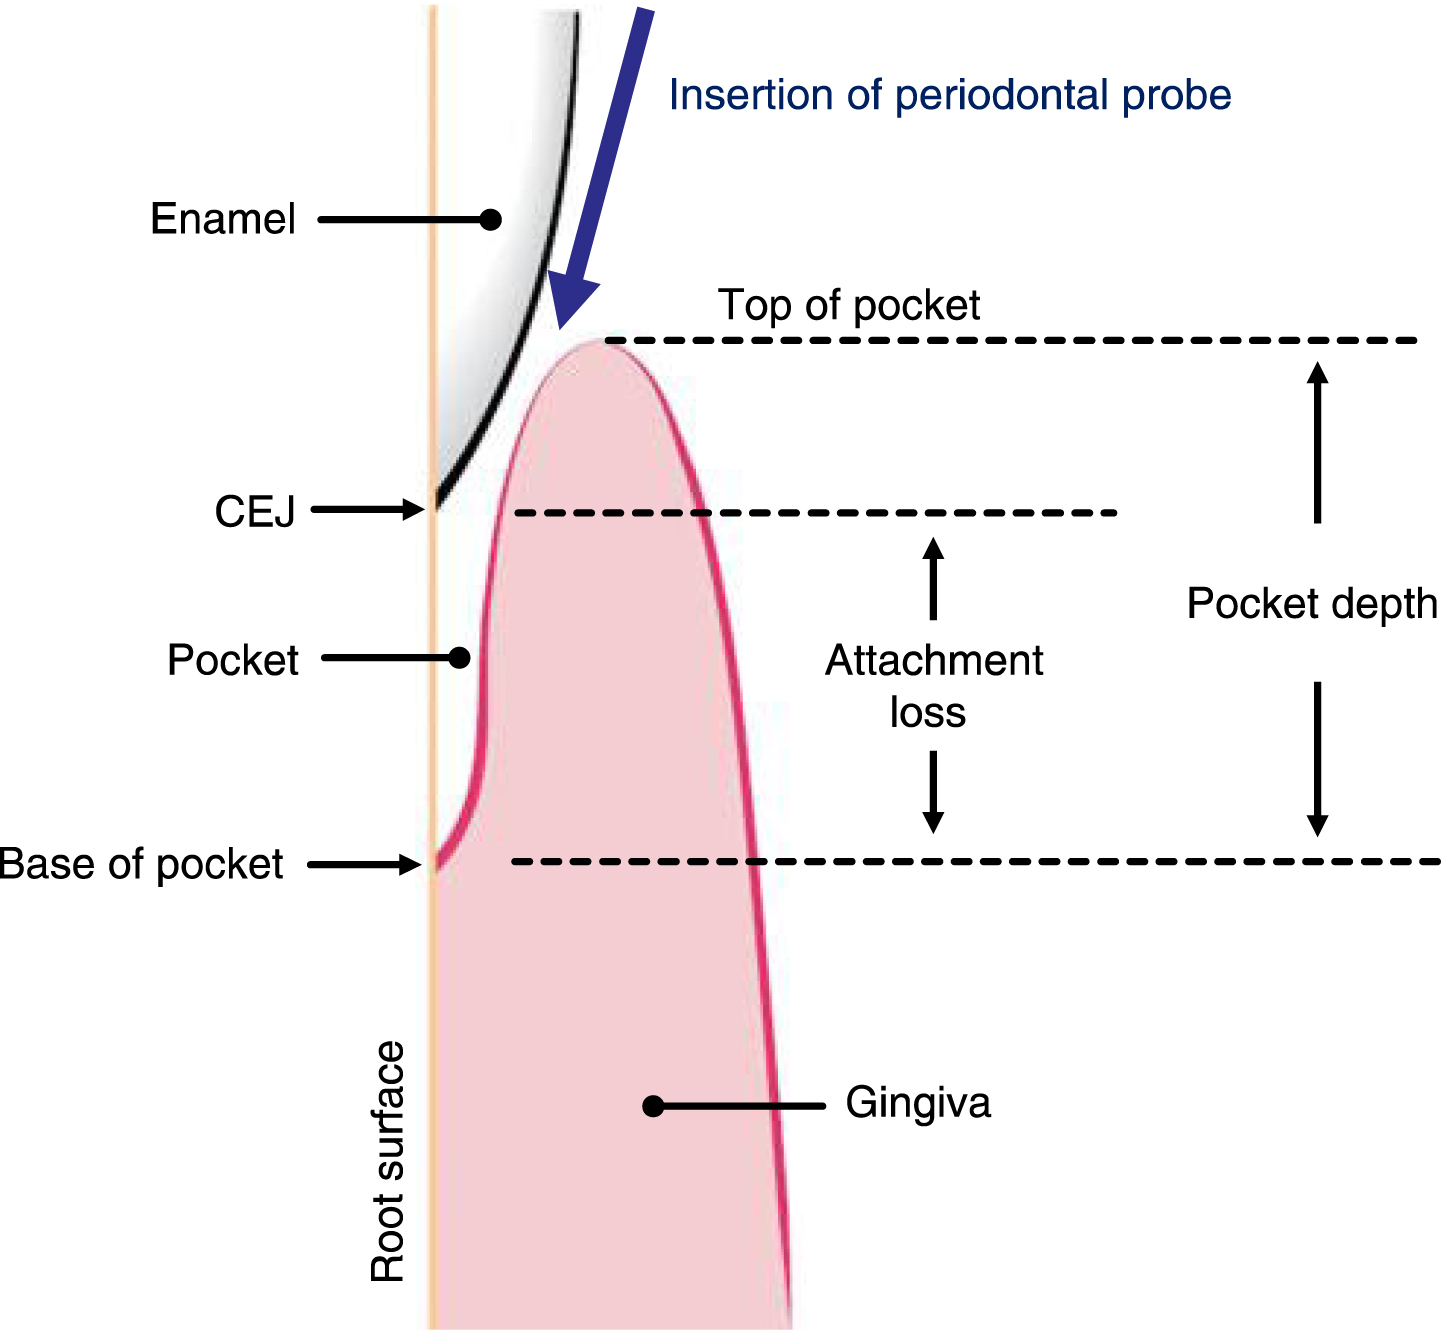 Diagram of clinical attachment loss and pocket depth in a patient with periodontal disease. This figure shows the schema of the clinical attachment loss and probing pocket depth, which indicate periodontal disease (PeD) [42]. The pocket is the space between the root surface and the gingiva. In PeD, the base of the pocket migrates apically, thereby creating a pocket. The base of the pocket is therefore apical to the cementoenamel junction (CEJ, the boundary between the enamel crown and the root), and attachment loss can be measured using a periodontal probe from the CEJ to the base of the pocket. Probing pocket depth is measured from the top of the pocket to the base of the pocket. Probing pocket depth is usually greater than attachment loss due to the inflammation-induced swelling of the gingiva. The direction of insertion of a periodontal probe is also indicated in this figure [42].